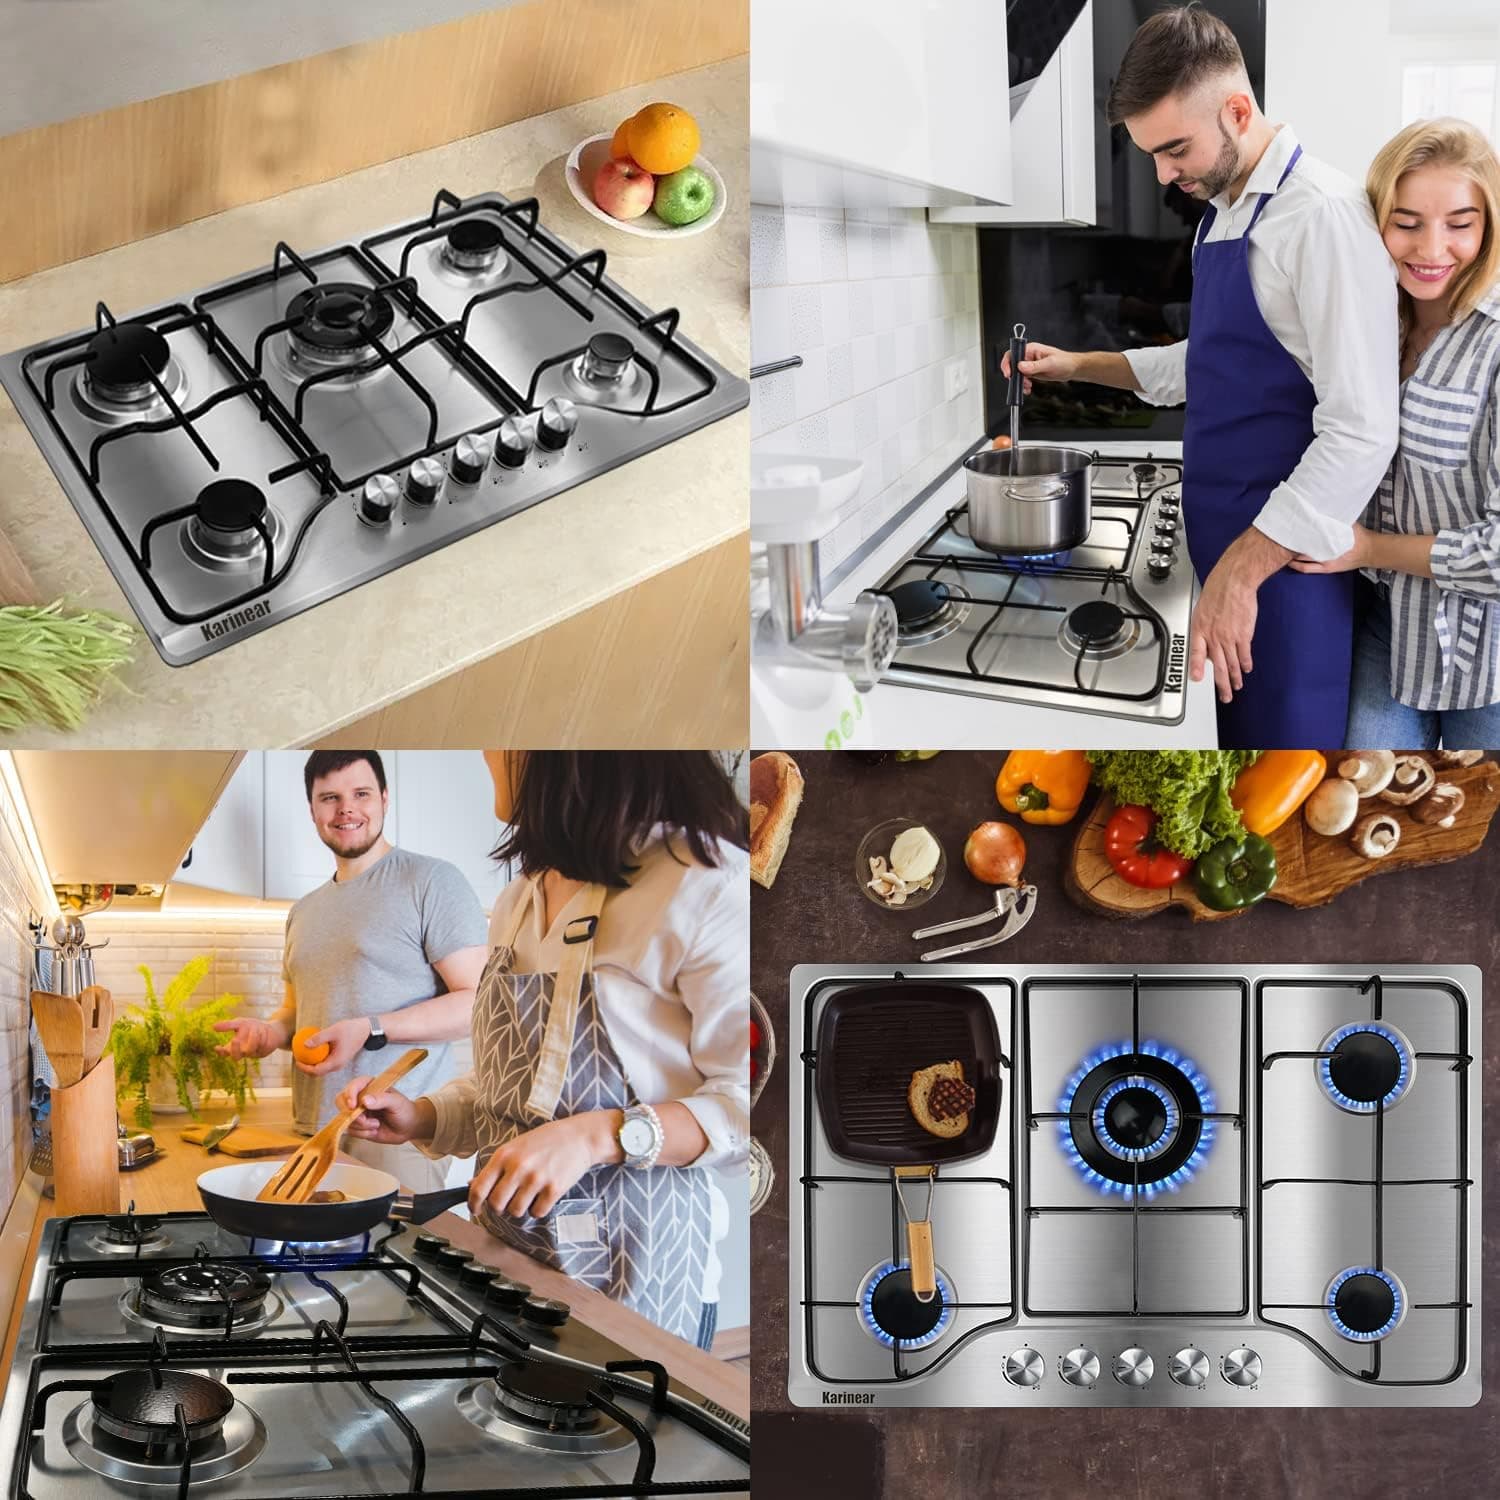 Karinear 24 inch Electric Stainless Steel Cooktop, 5200W Electric Hob for  Cooking, Built-in and Countertop Ceraminc Stove Top with 4 Burners, Knob  Control, 16 Power Levels, 220-240V, No Plug